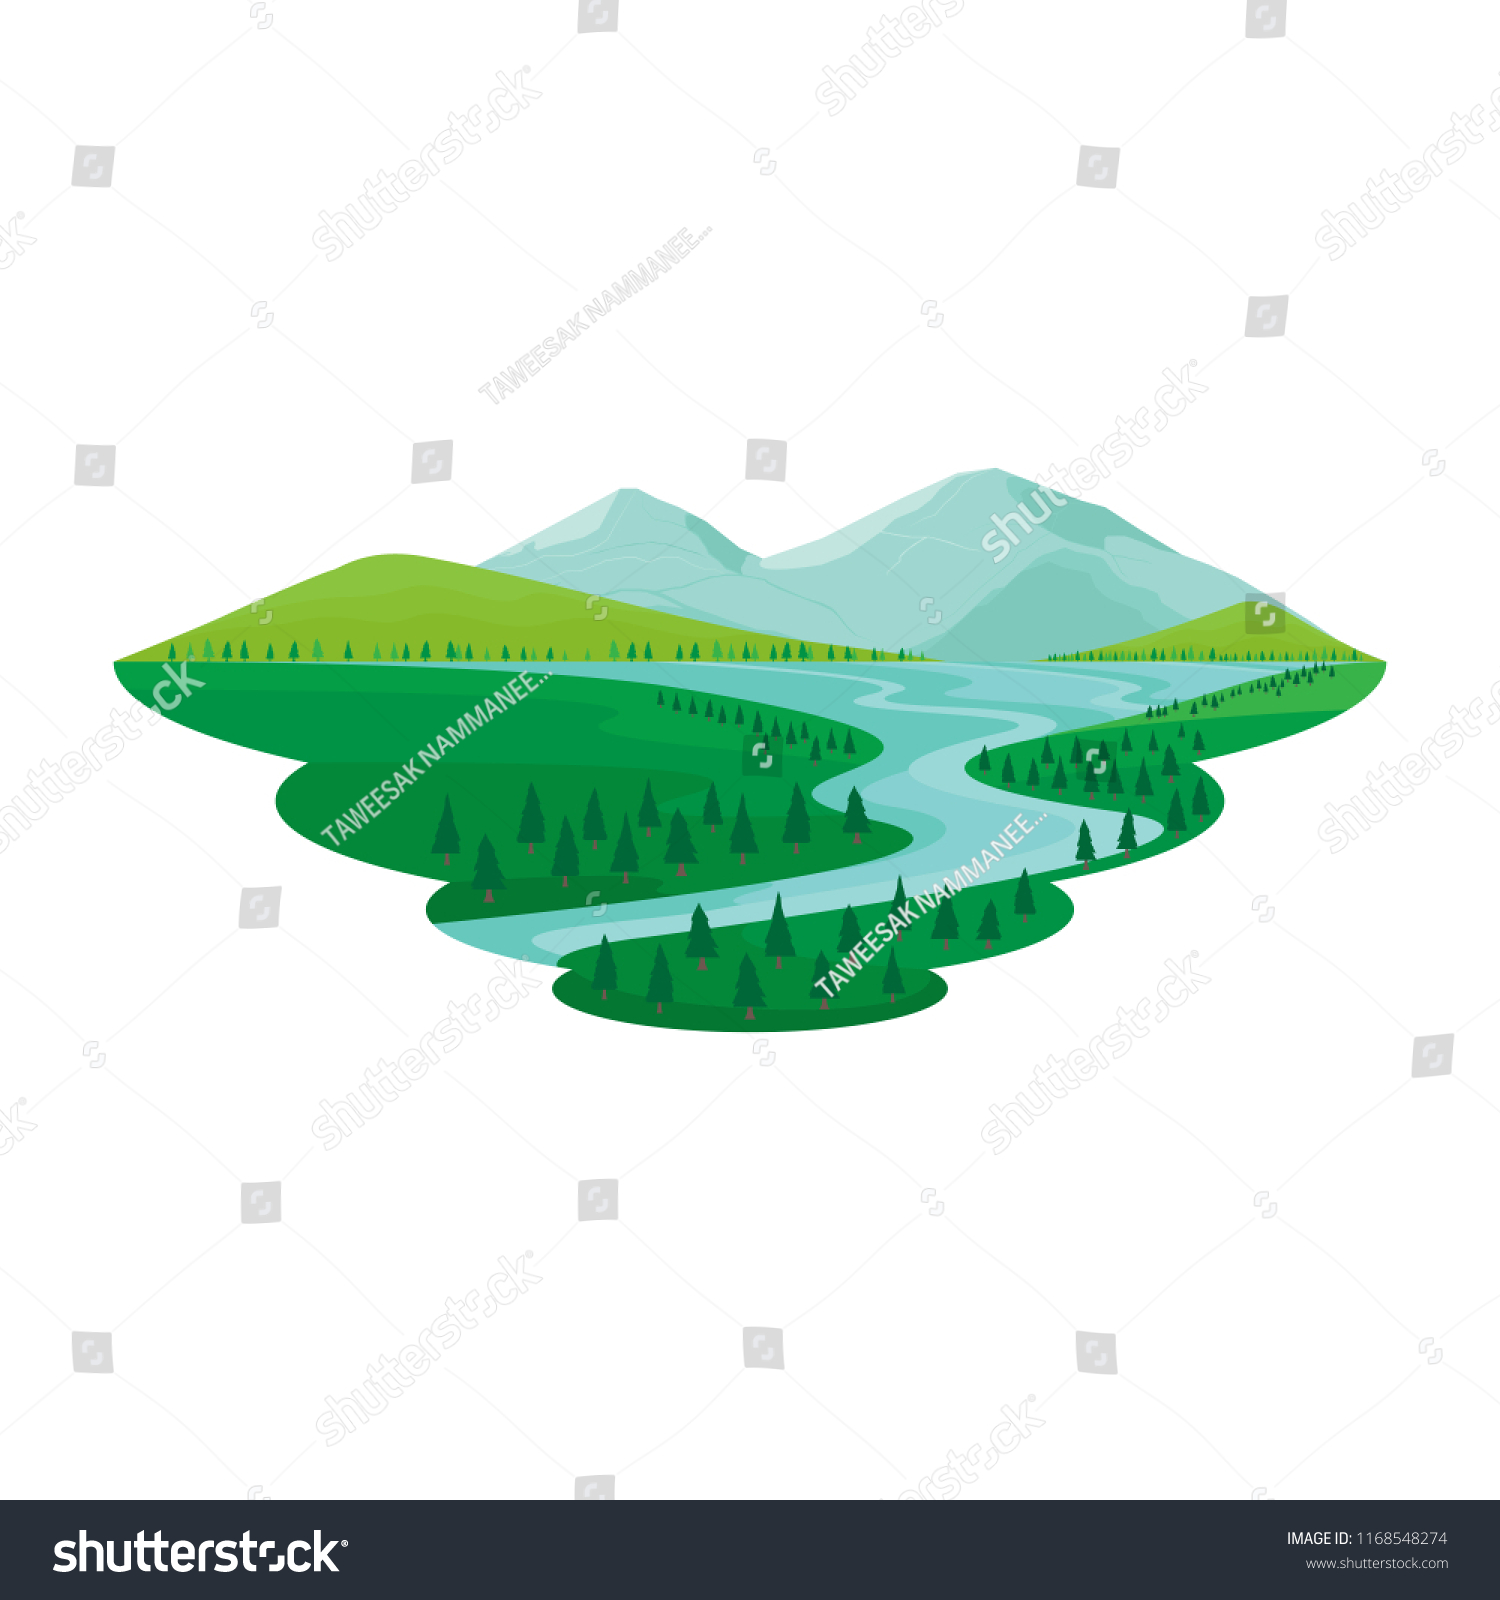 Lake and River Pine Forest Mountain View Landscape Vector